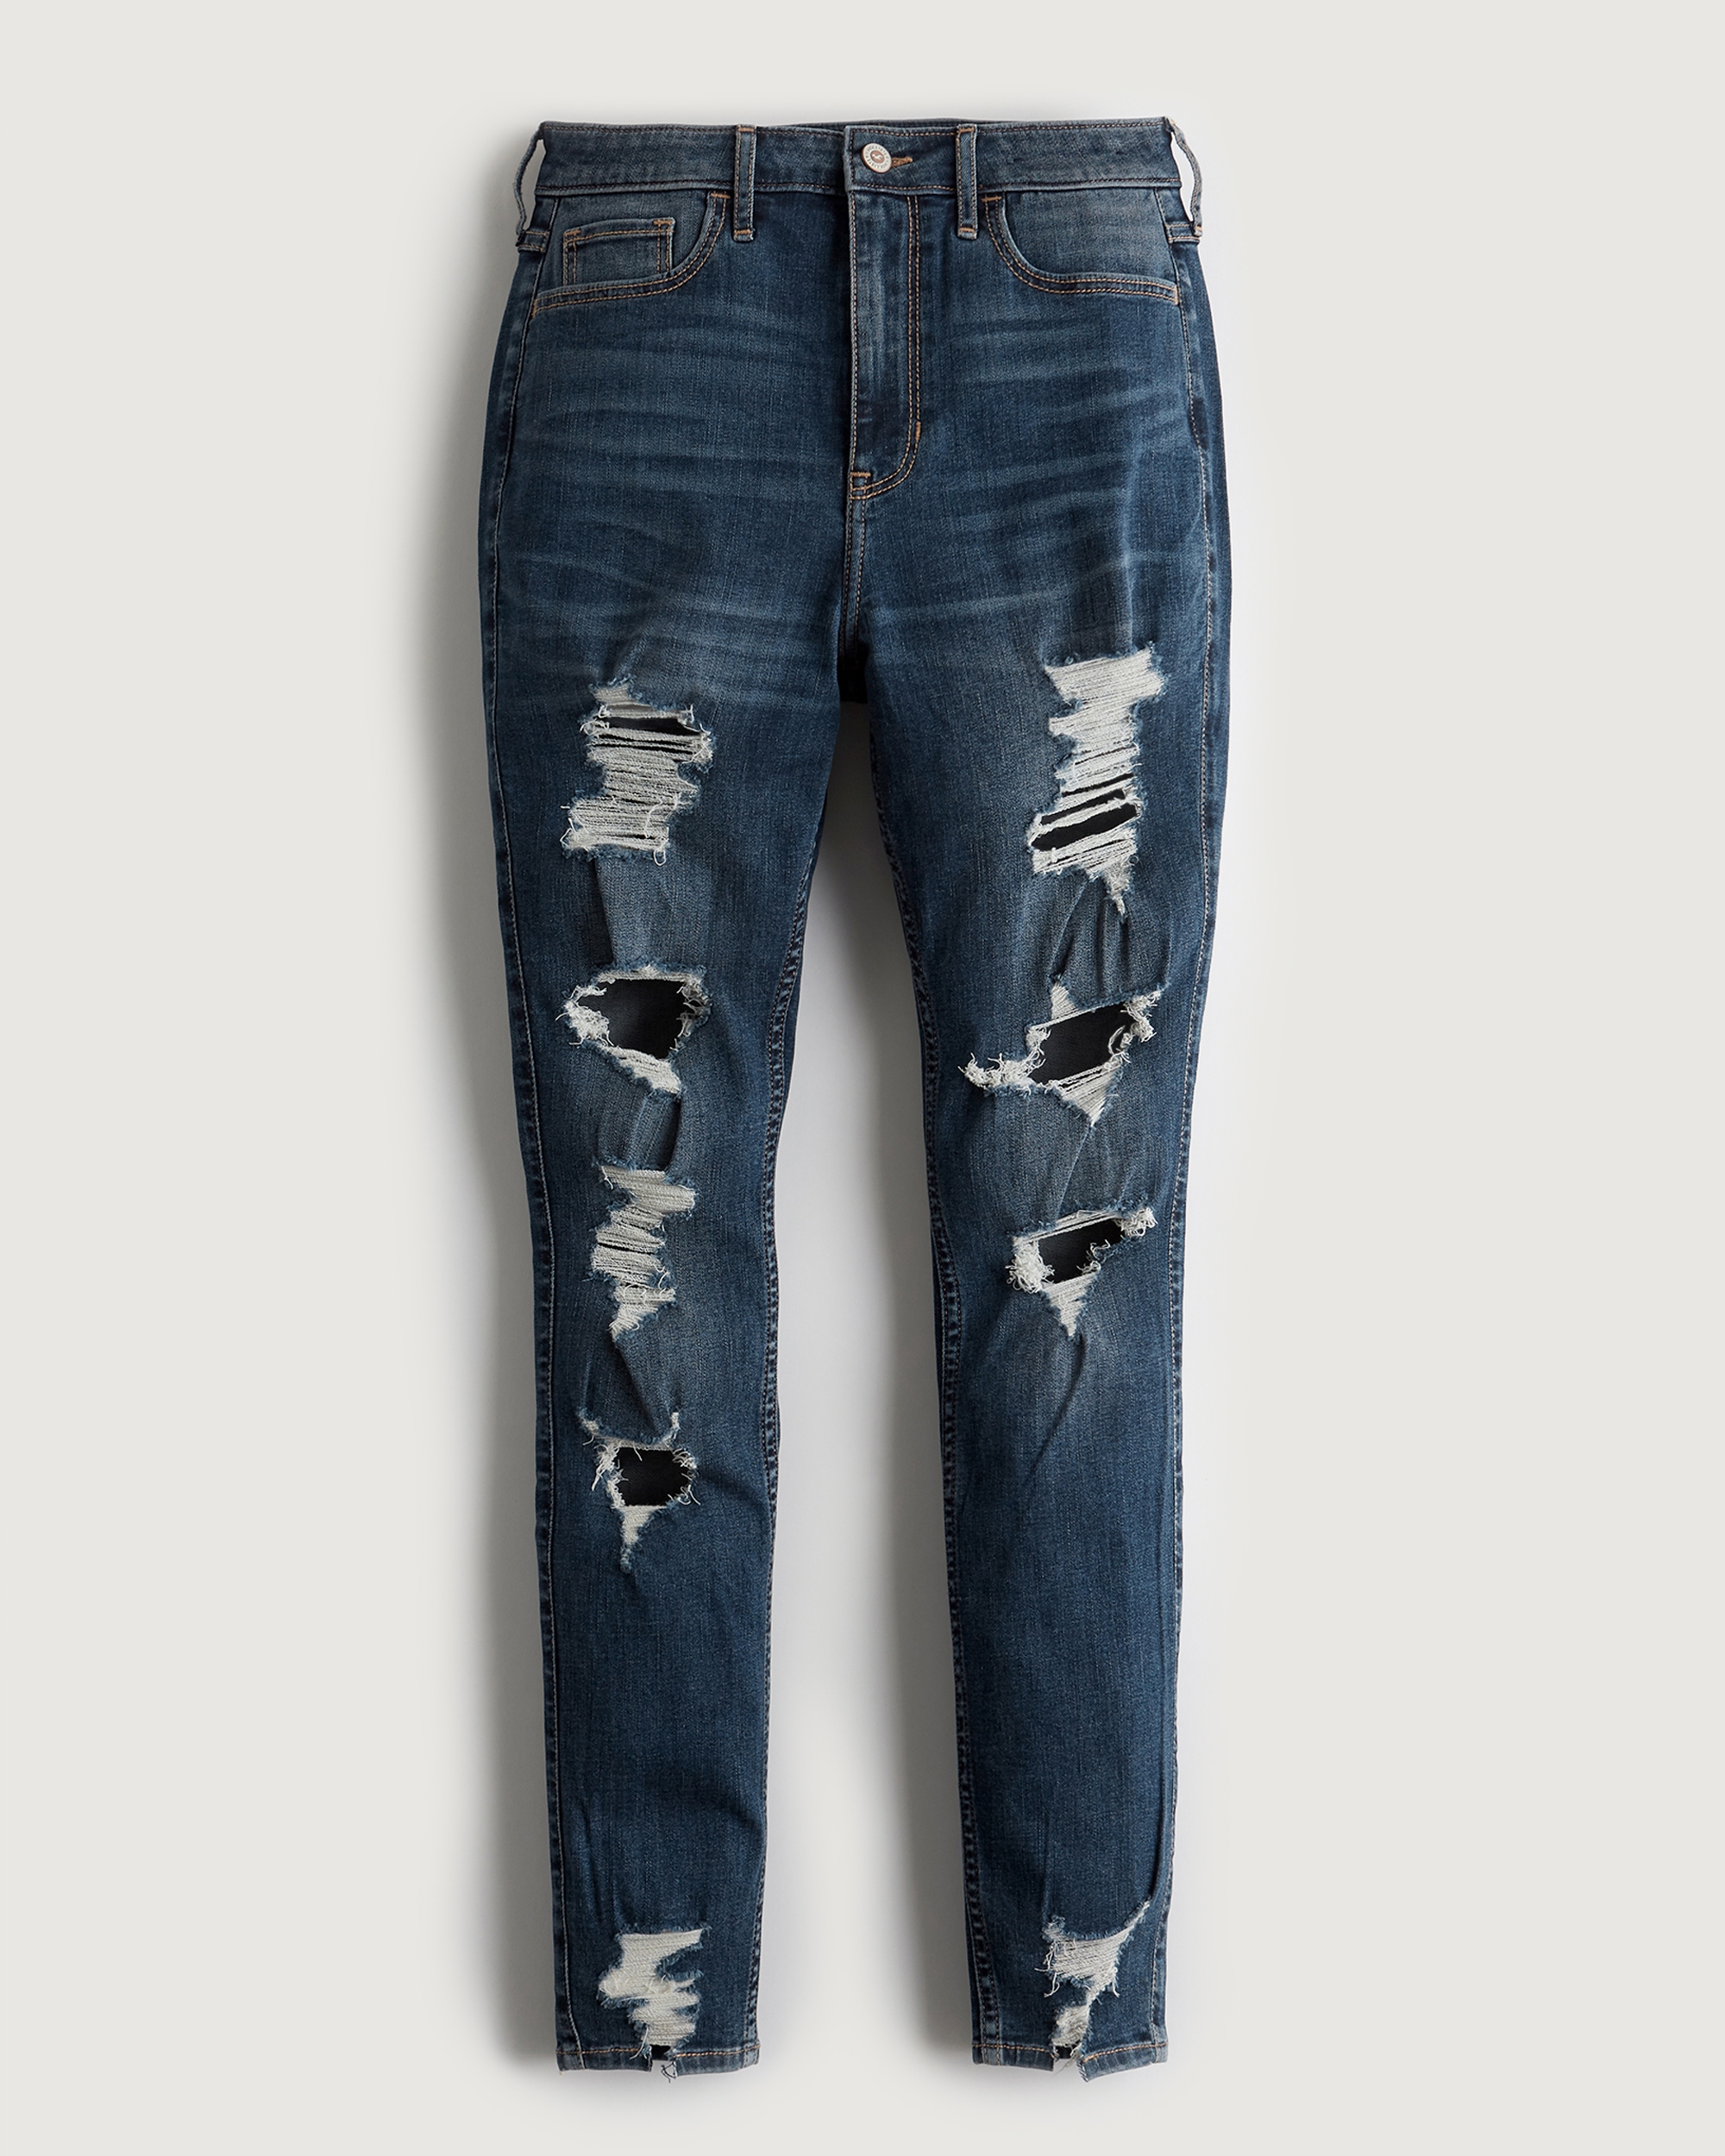 hollister jeans review